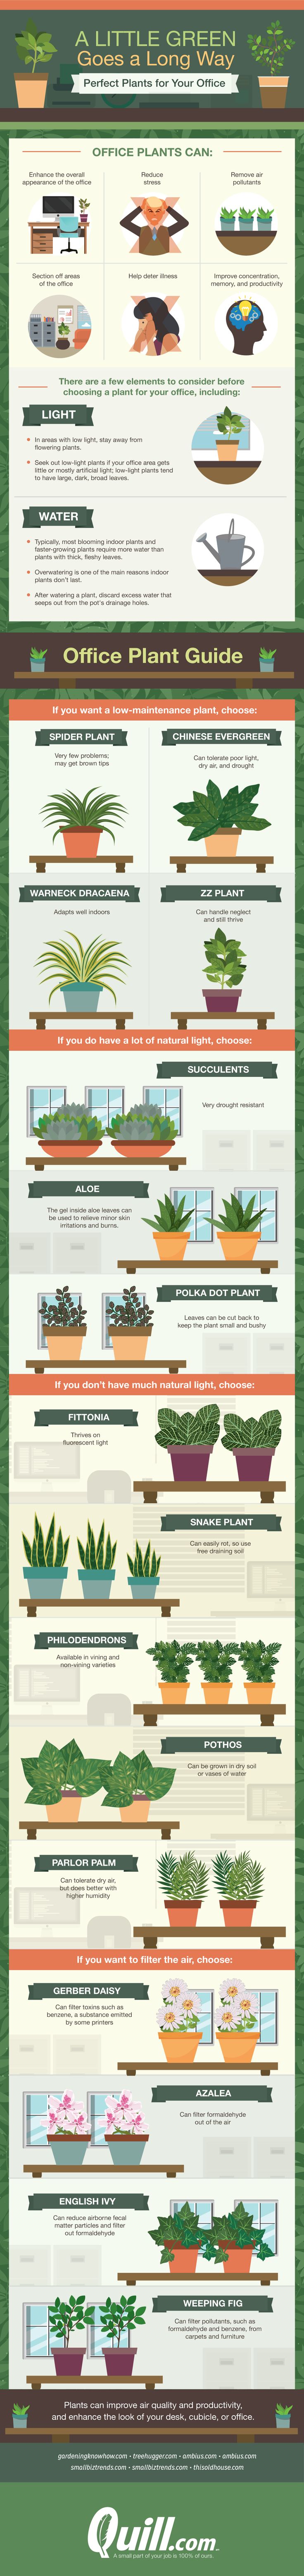 A Little Green Goes a Long Way: Plants Perfect for Your Office